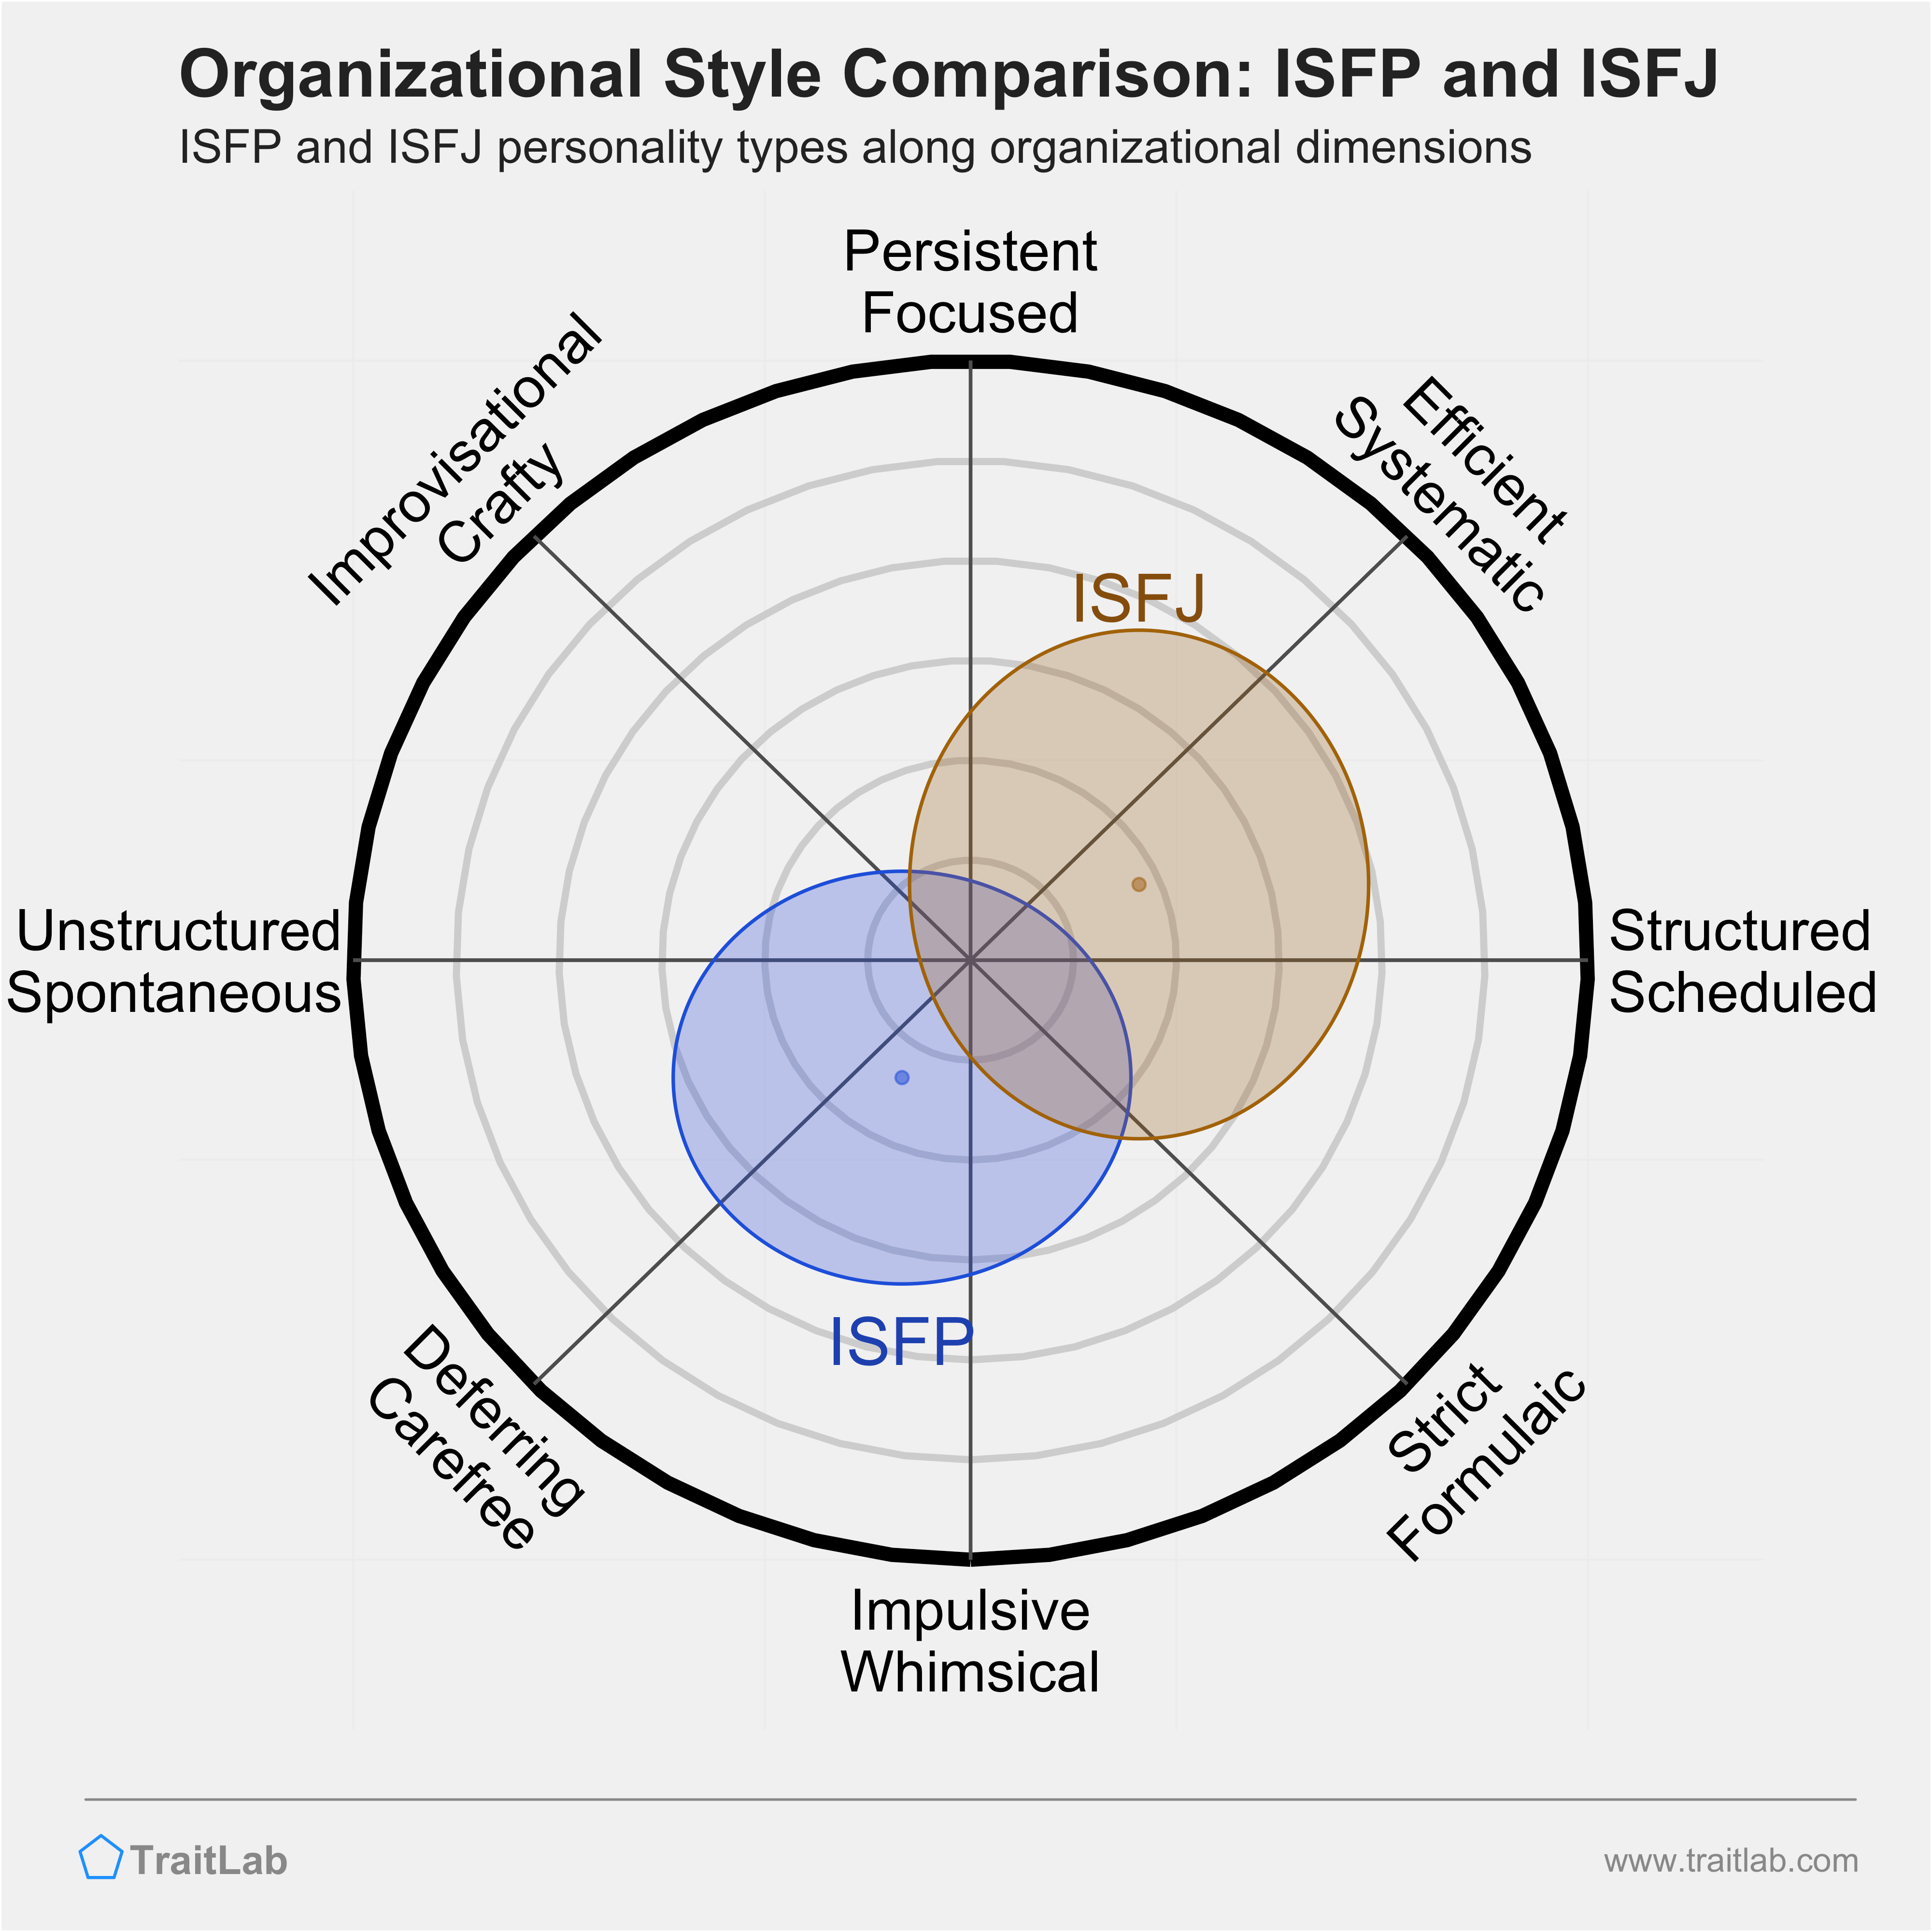 ISFP and ISFJ comparison across organizational dimensions